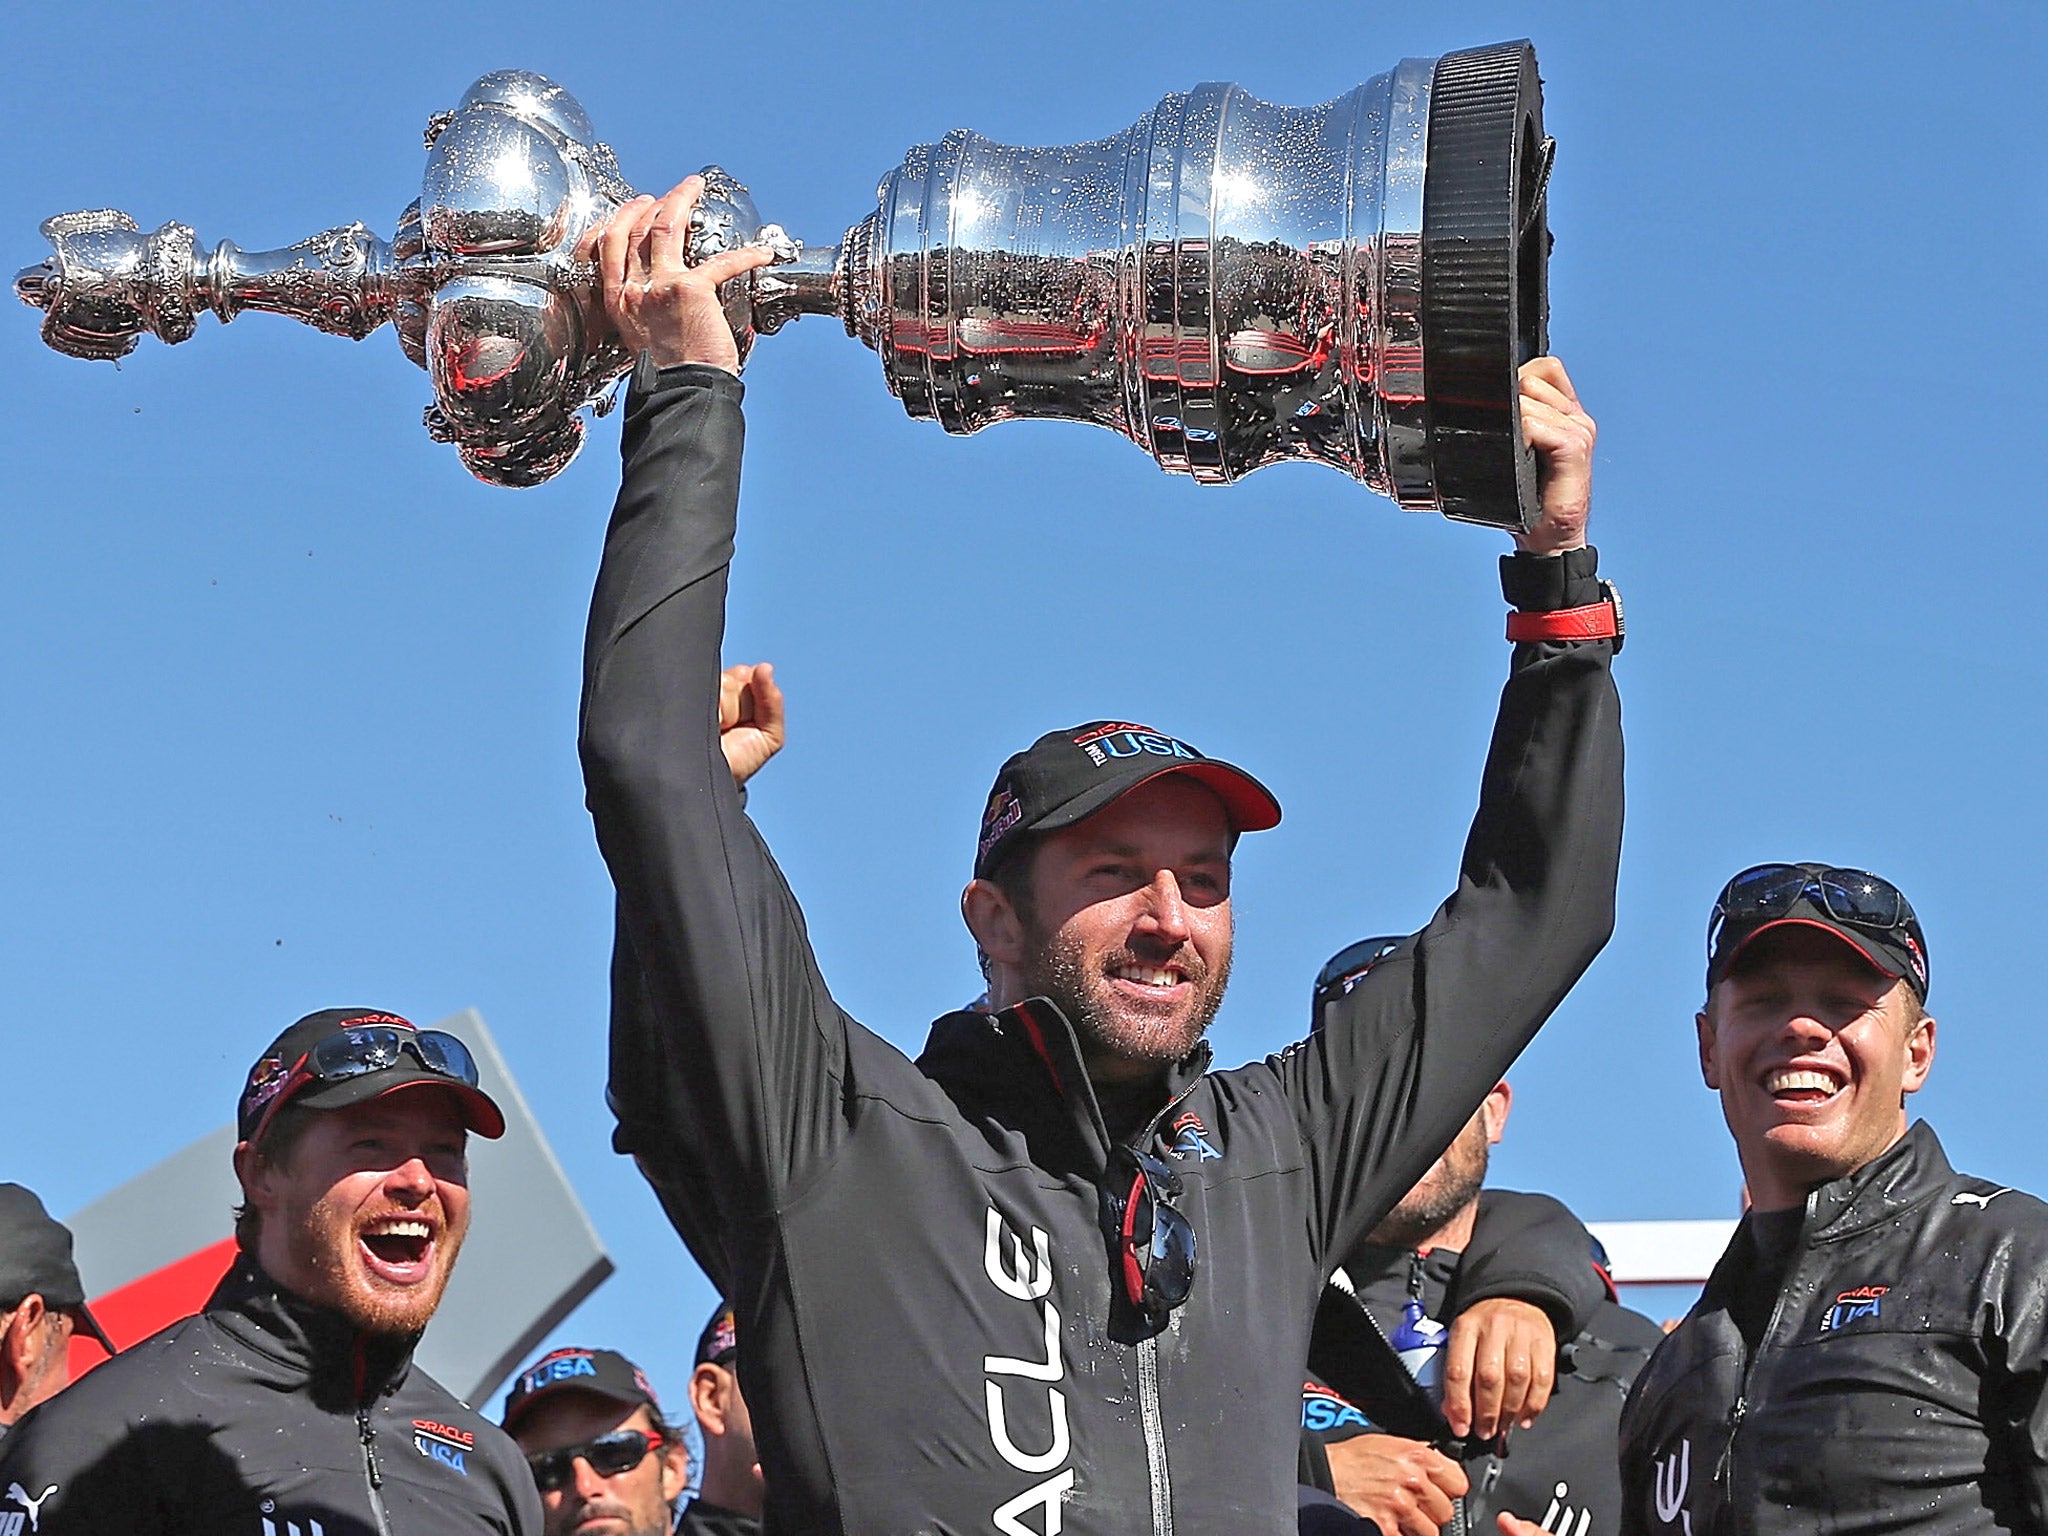 Sir Ben Ainslie played a role in Oracle Team USA's victory last year